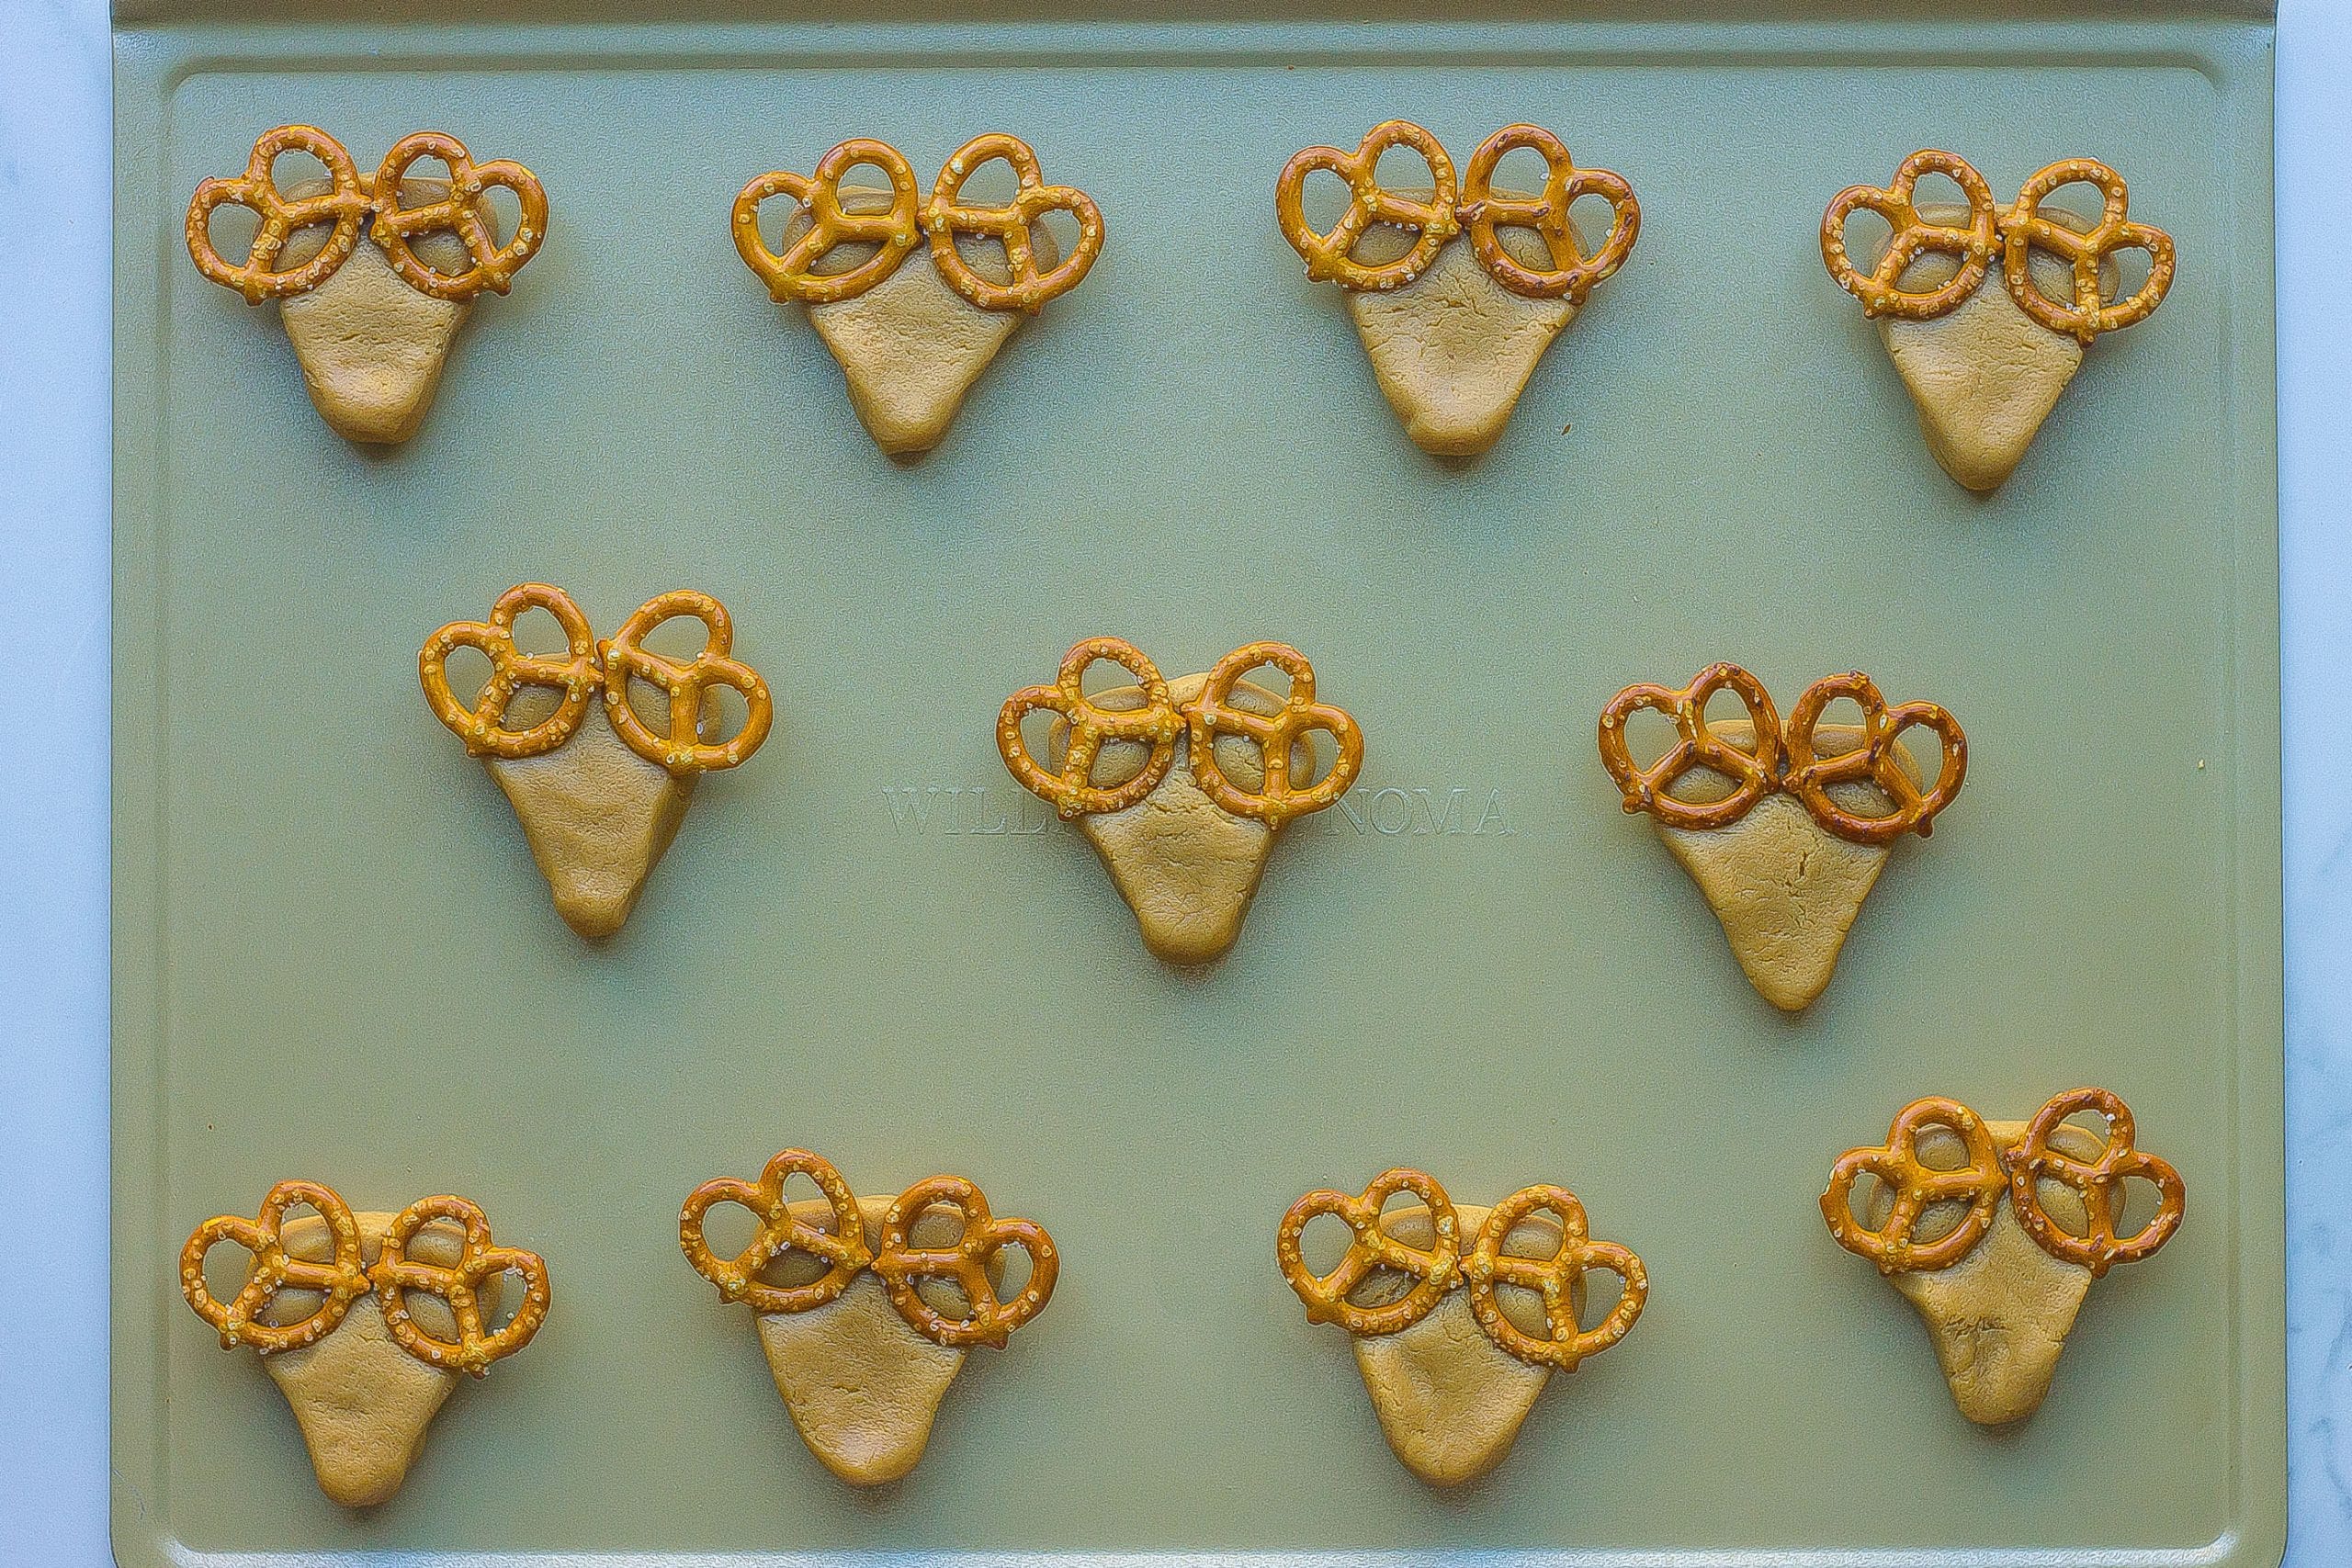 shaped peanut butter dough with pretzels placed on top.